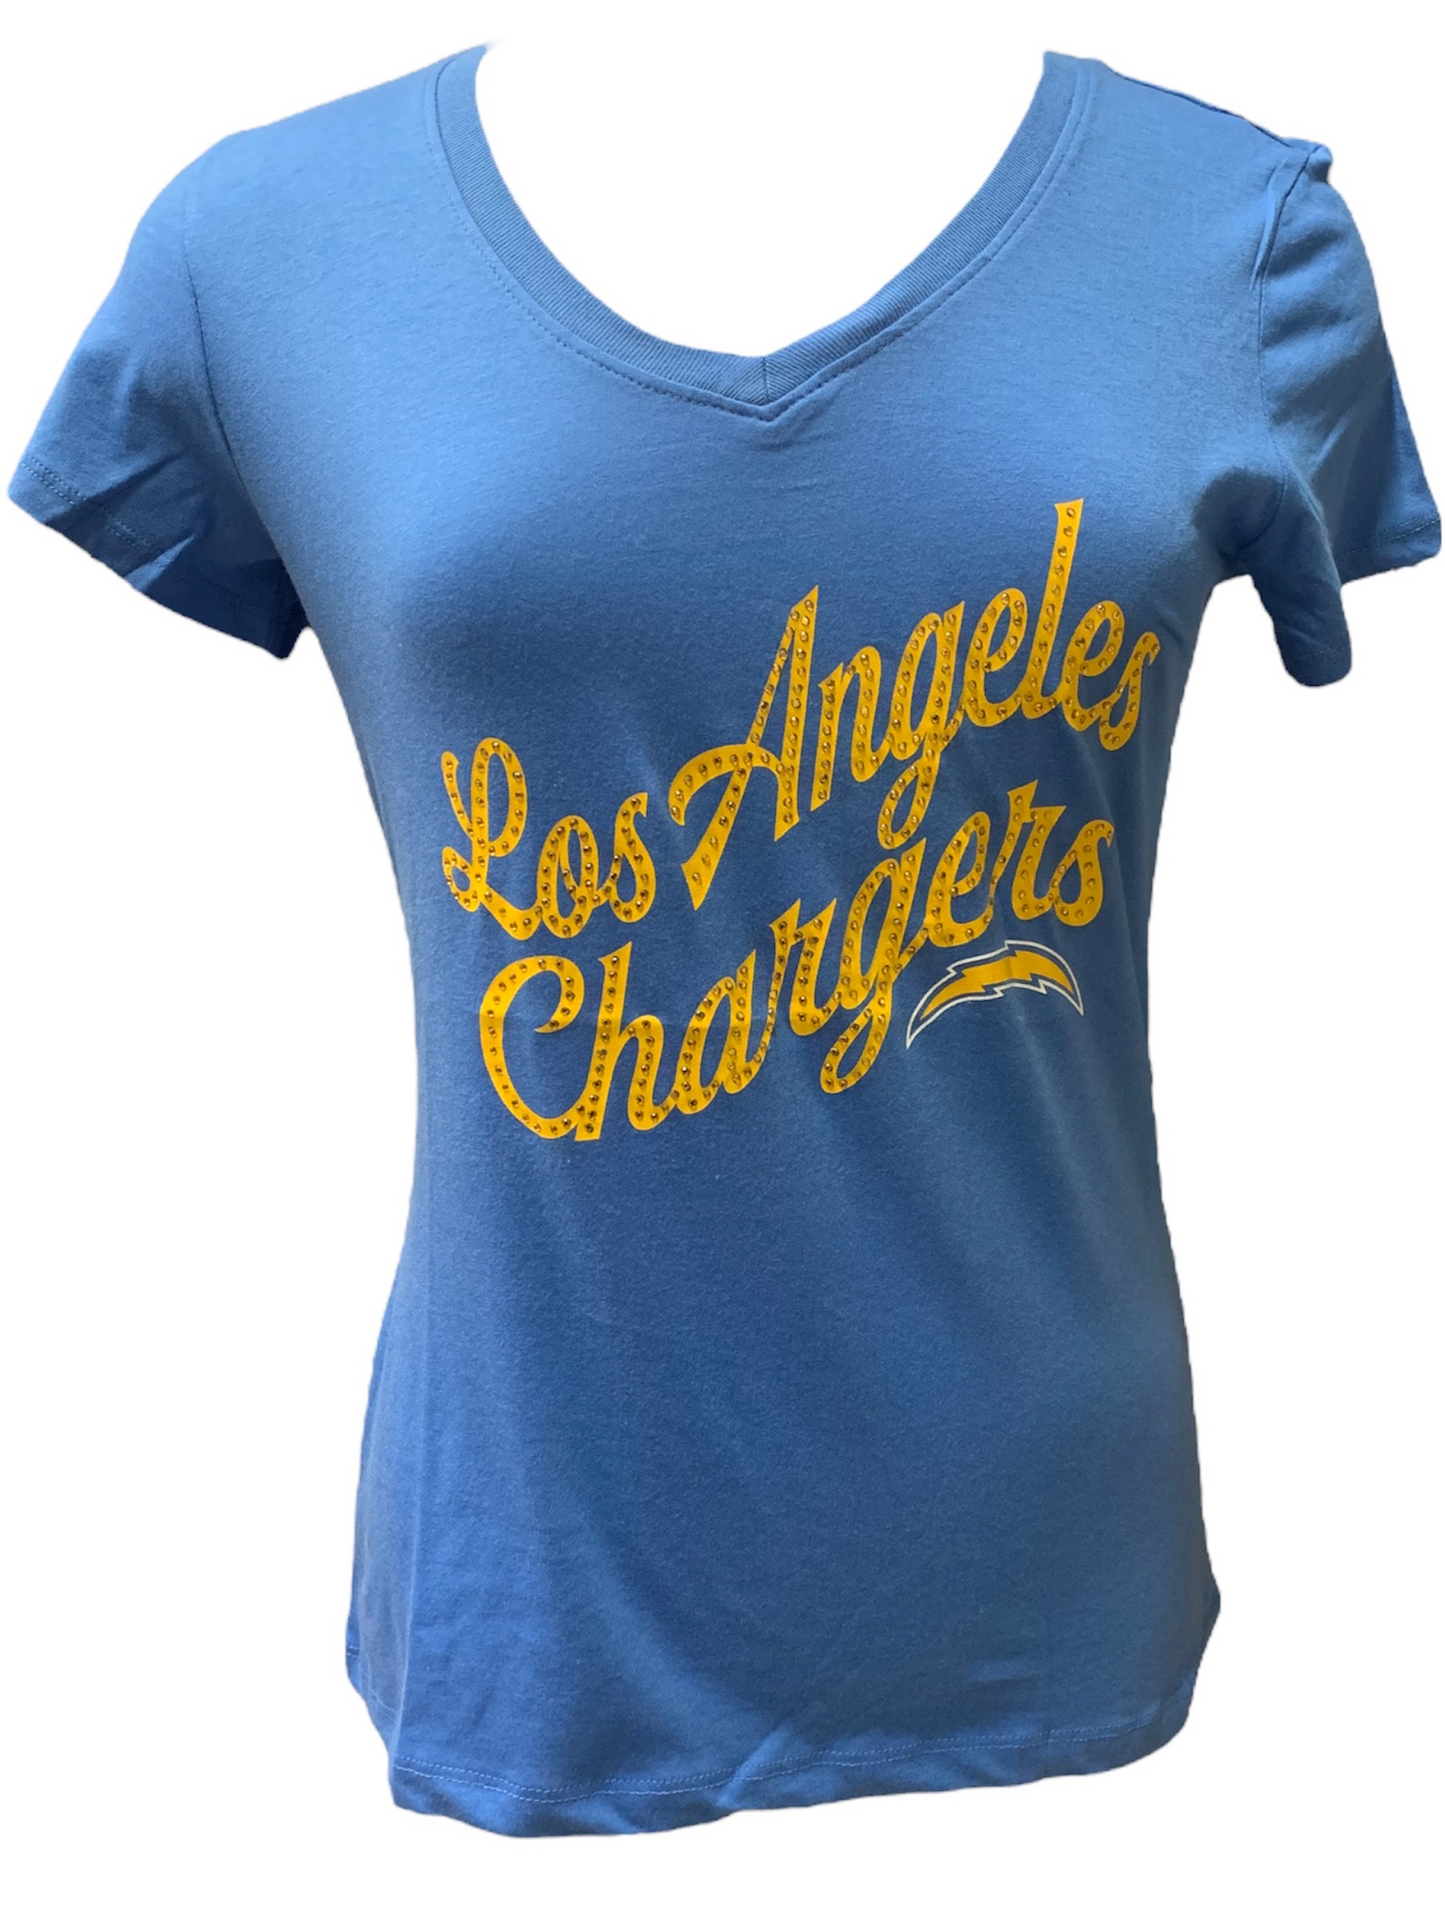 LOS ANGELES CHARGERS WOMEN'S BEDAZZLE T-SHIRT